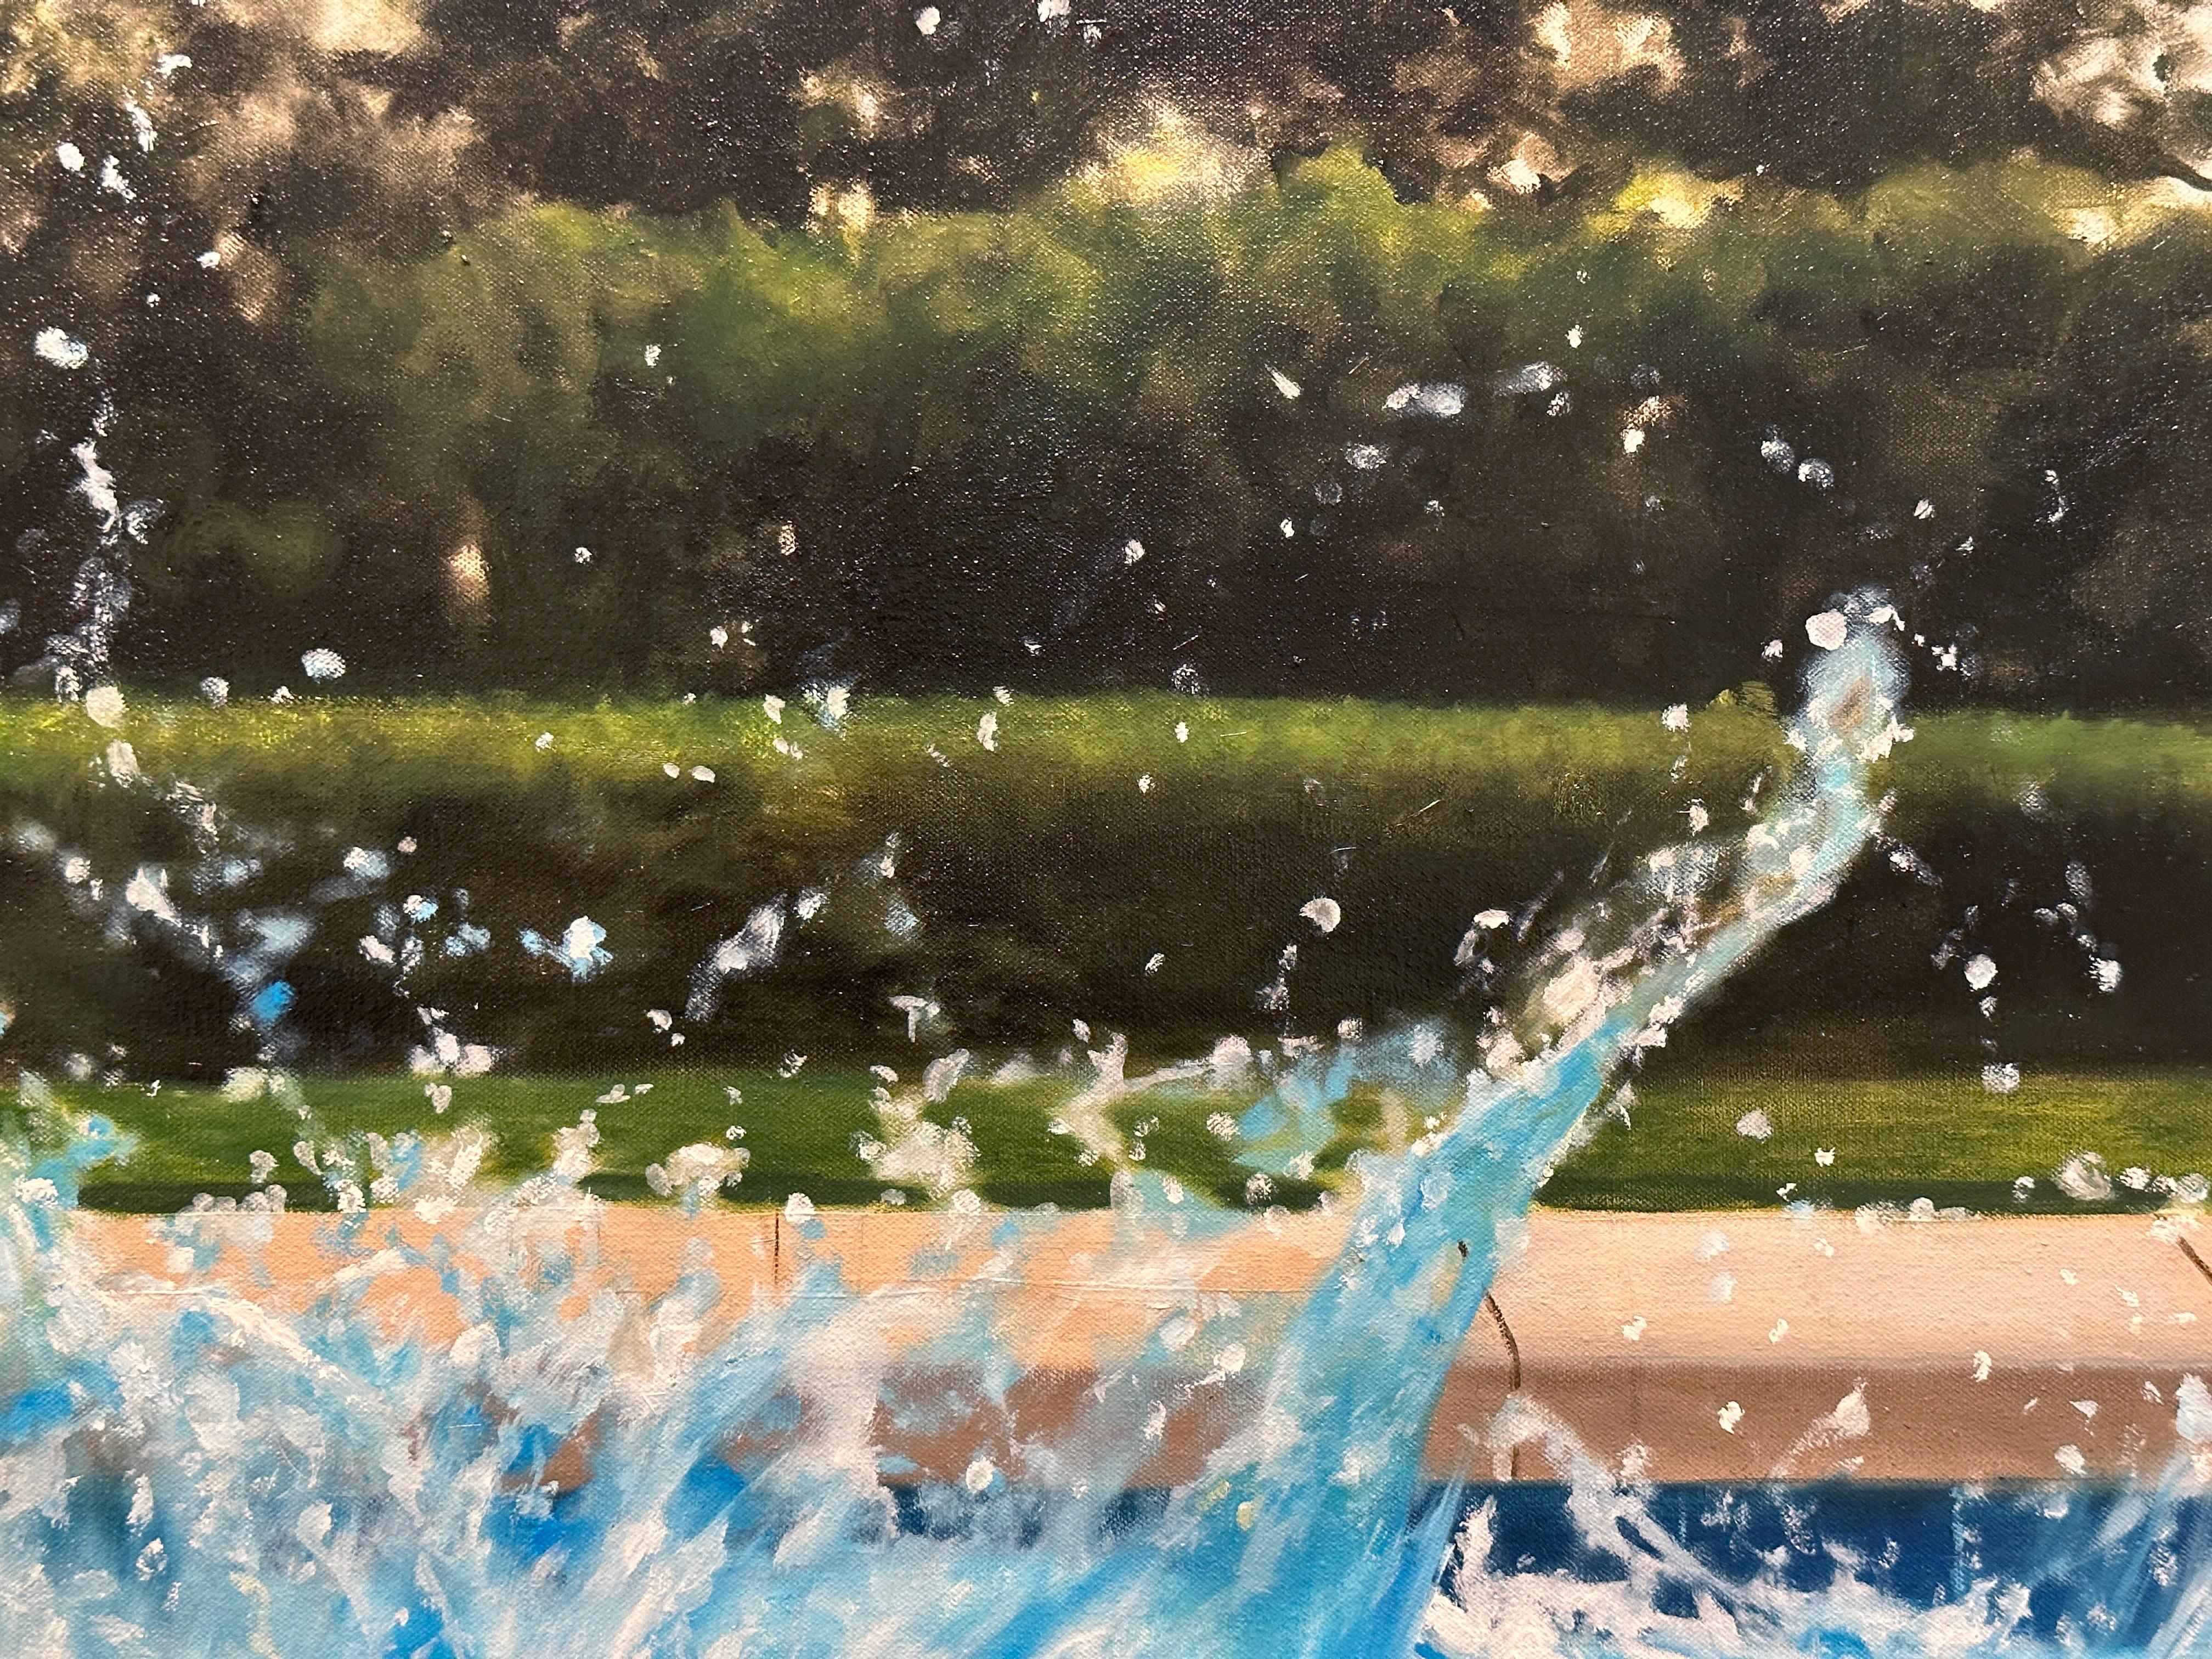 MONTECITO MORNING - Contemporary Realism / Pool Water Scene / California Vibe For Sale 3